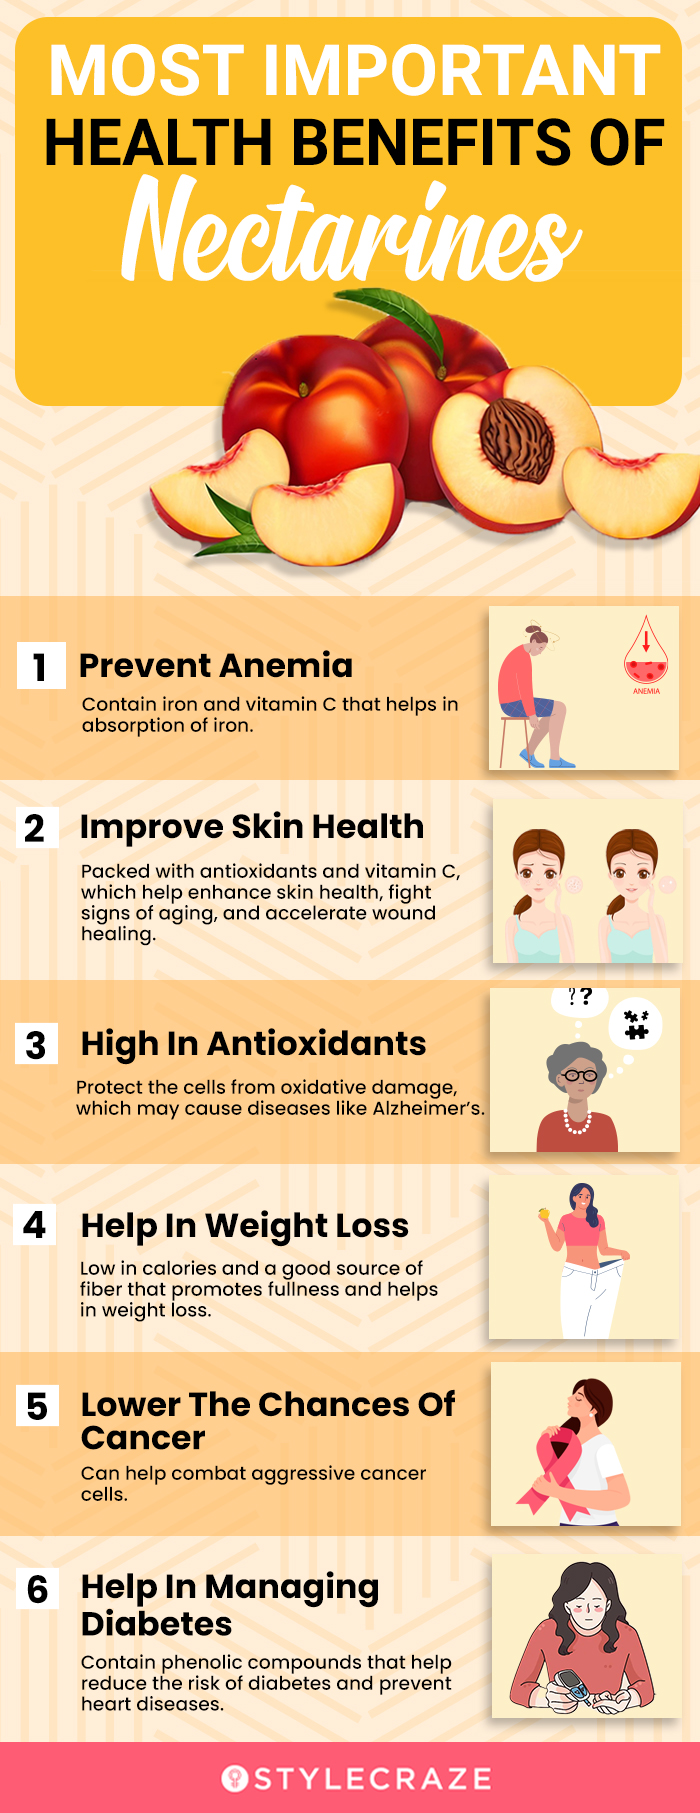 most important health benefits of nectarines (infographic)